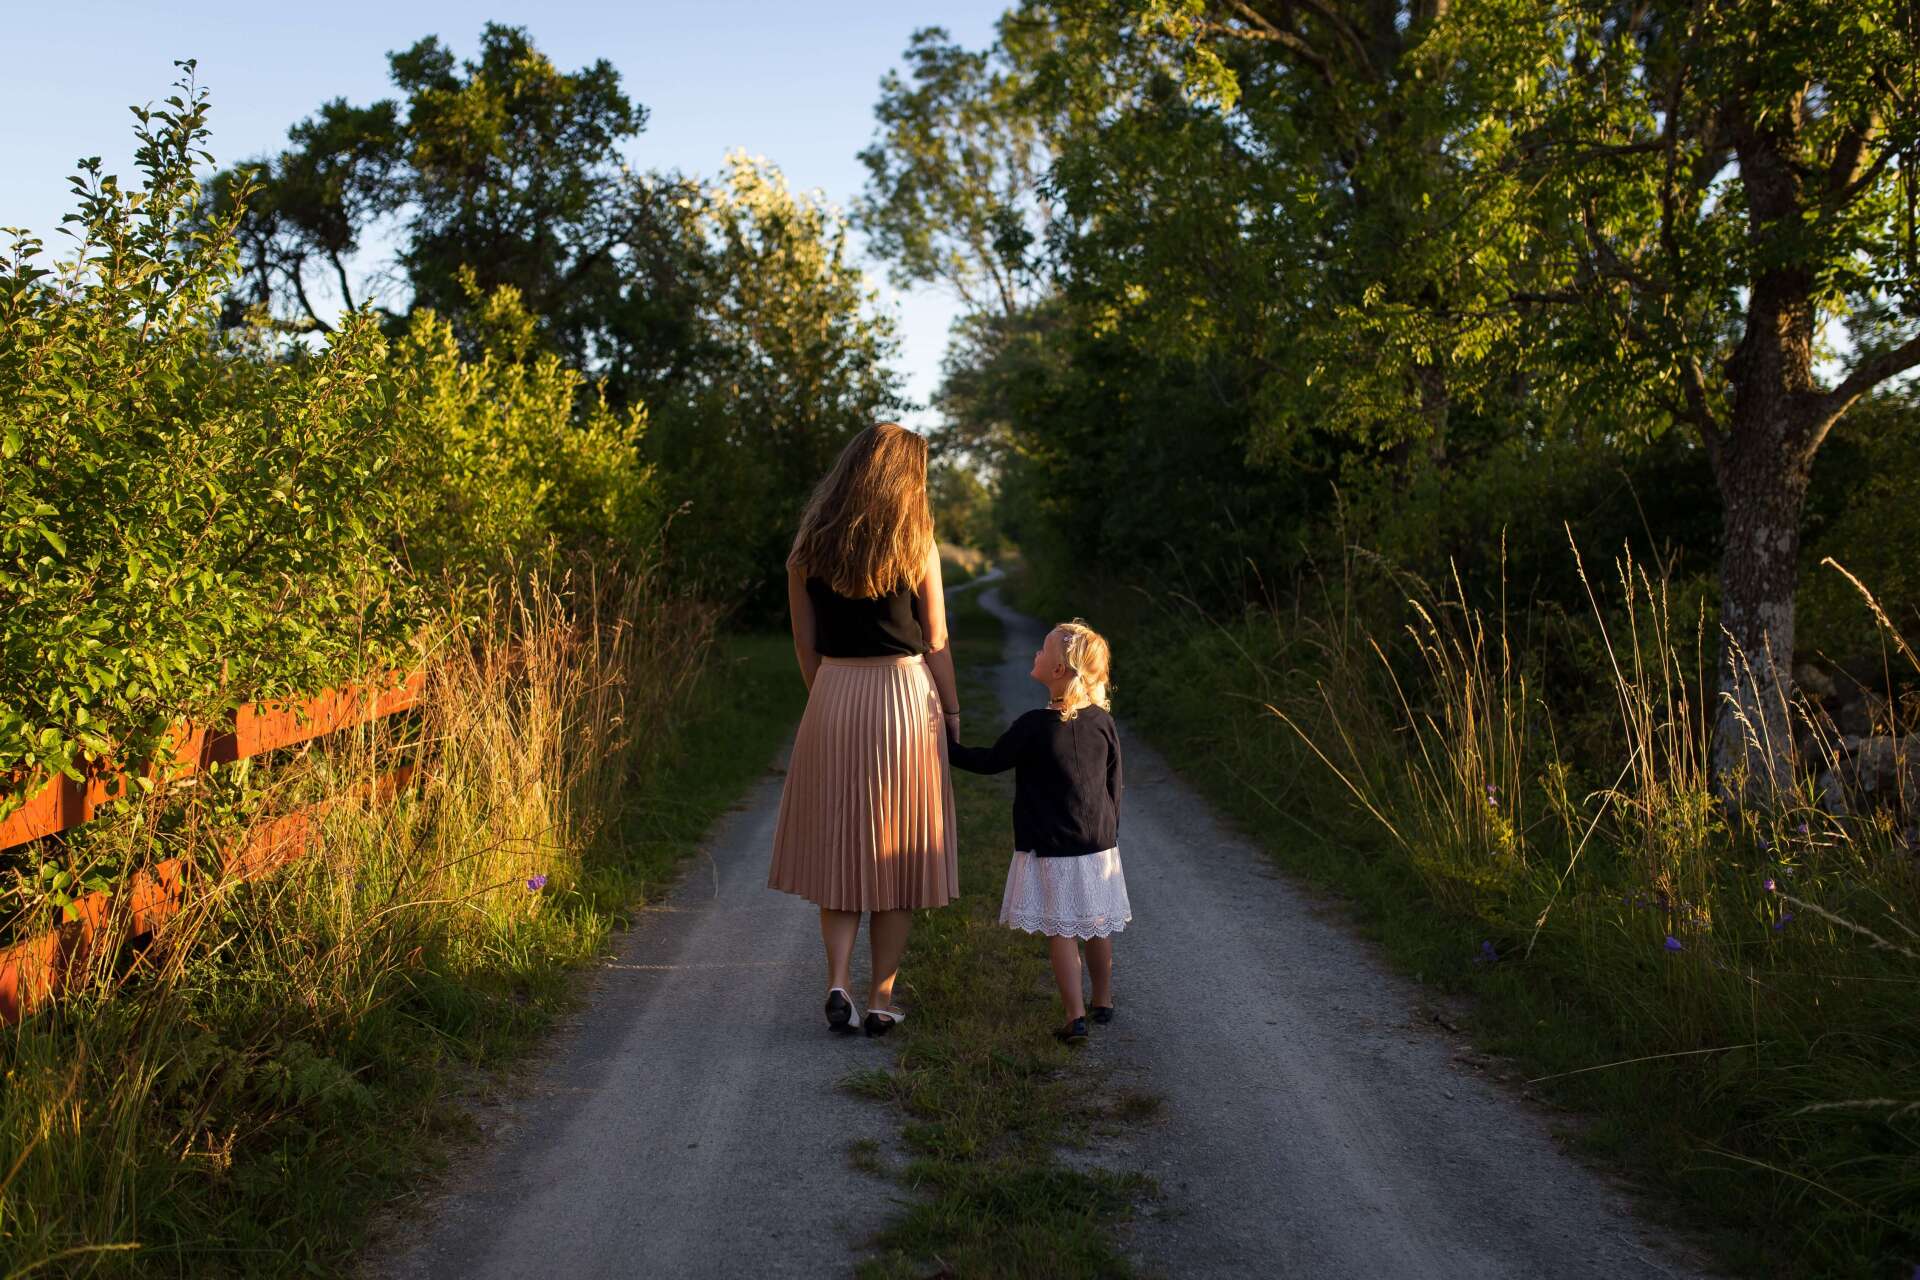 Lady and Child Walking Down Trail in Funeral Service Attire